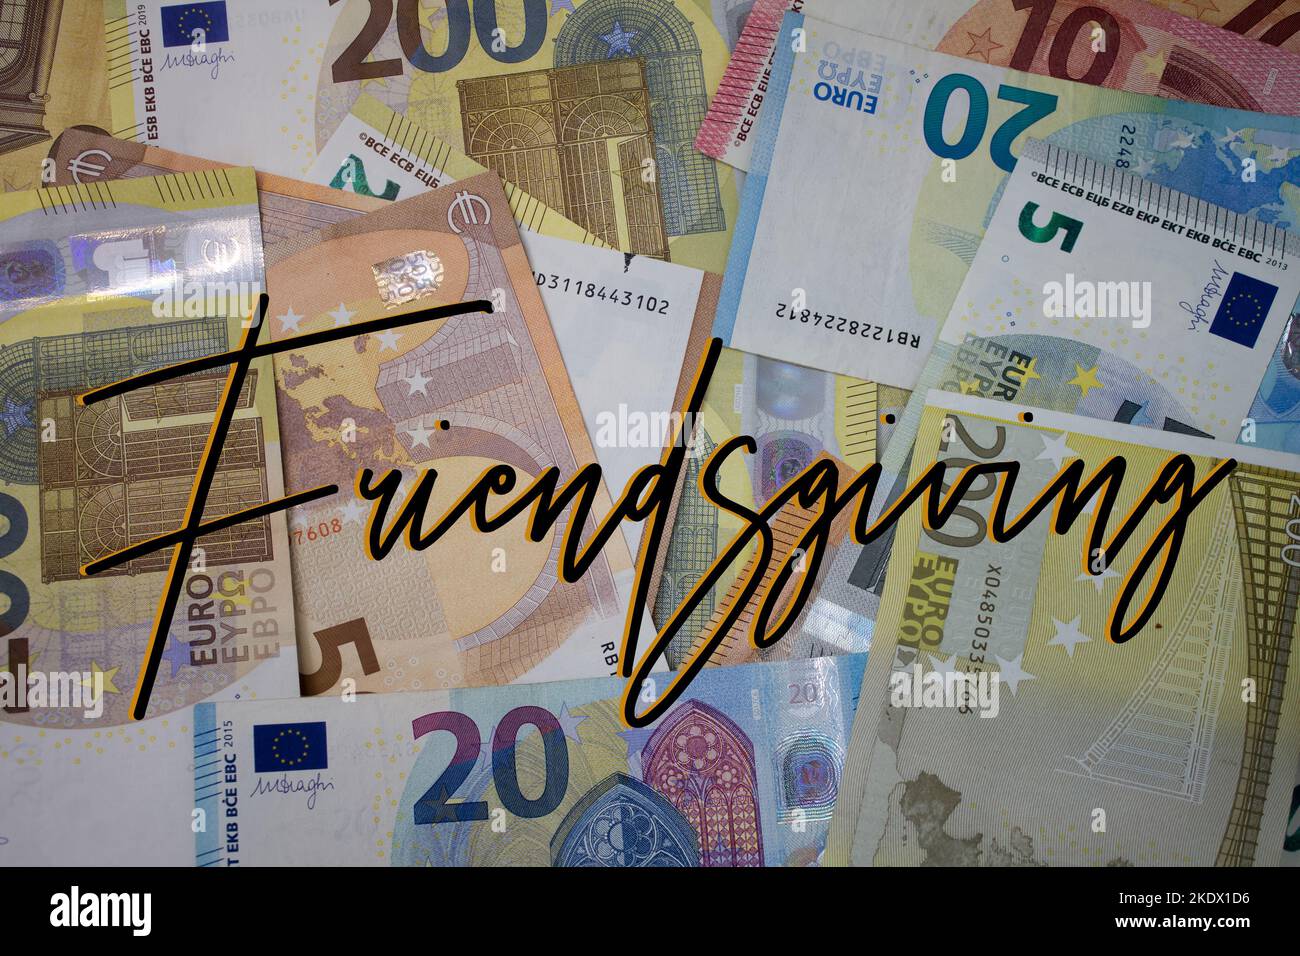 Friendsgiving word with money. Paper currency background with different banknotes. Stock Photo